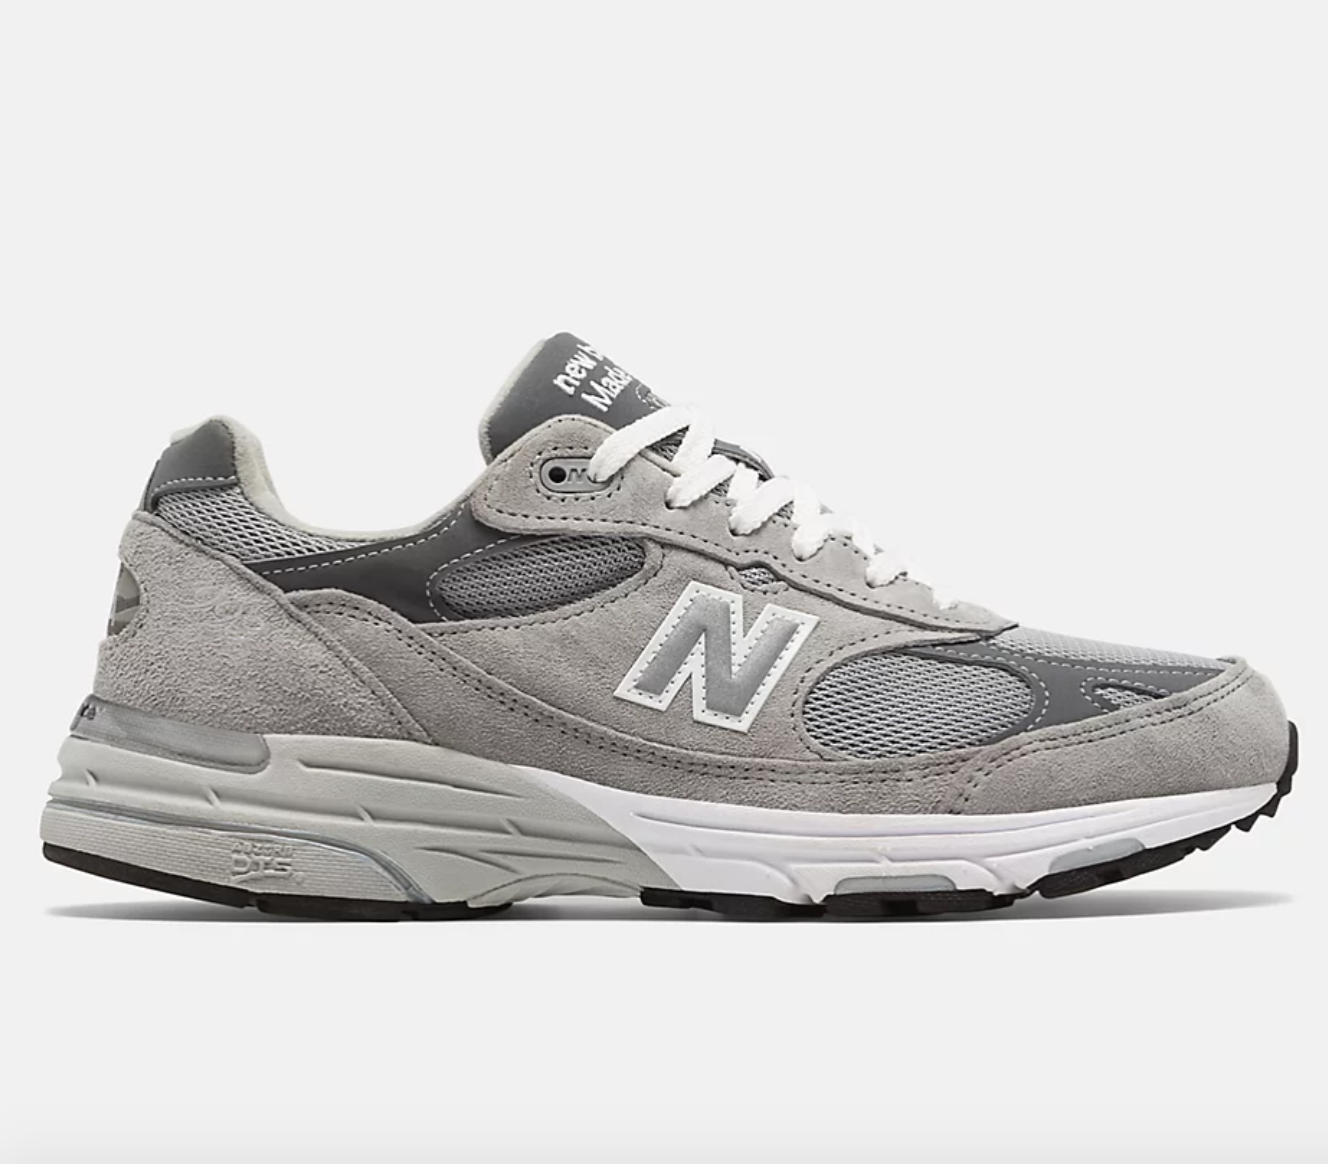 Kwade trouw Marine Verwoesting The Best New Balance Sneakers According To User Reviews